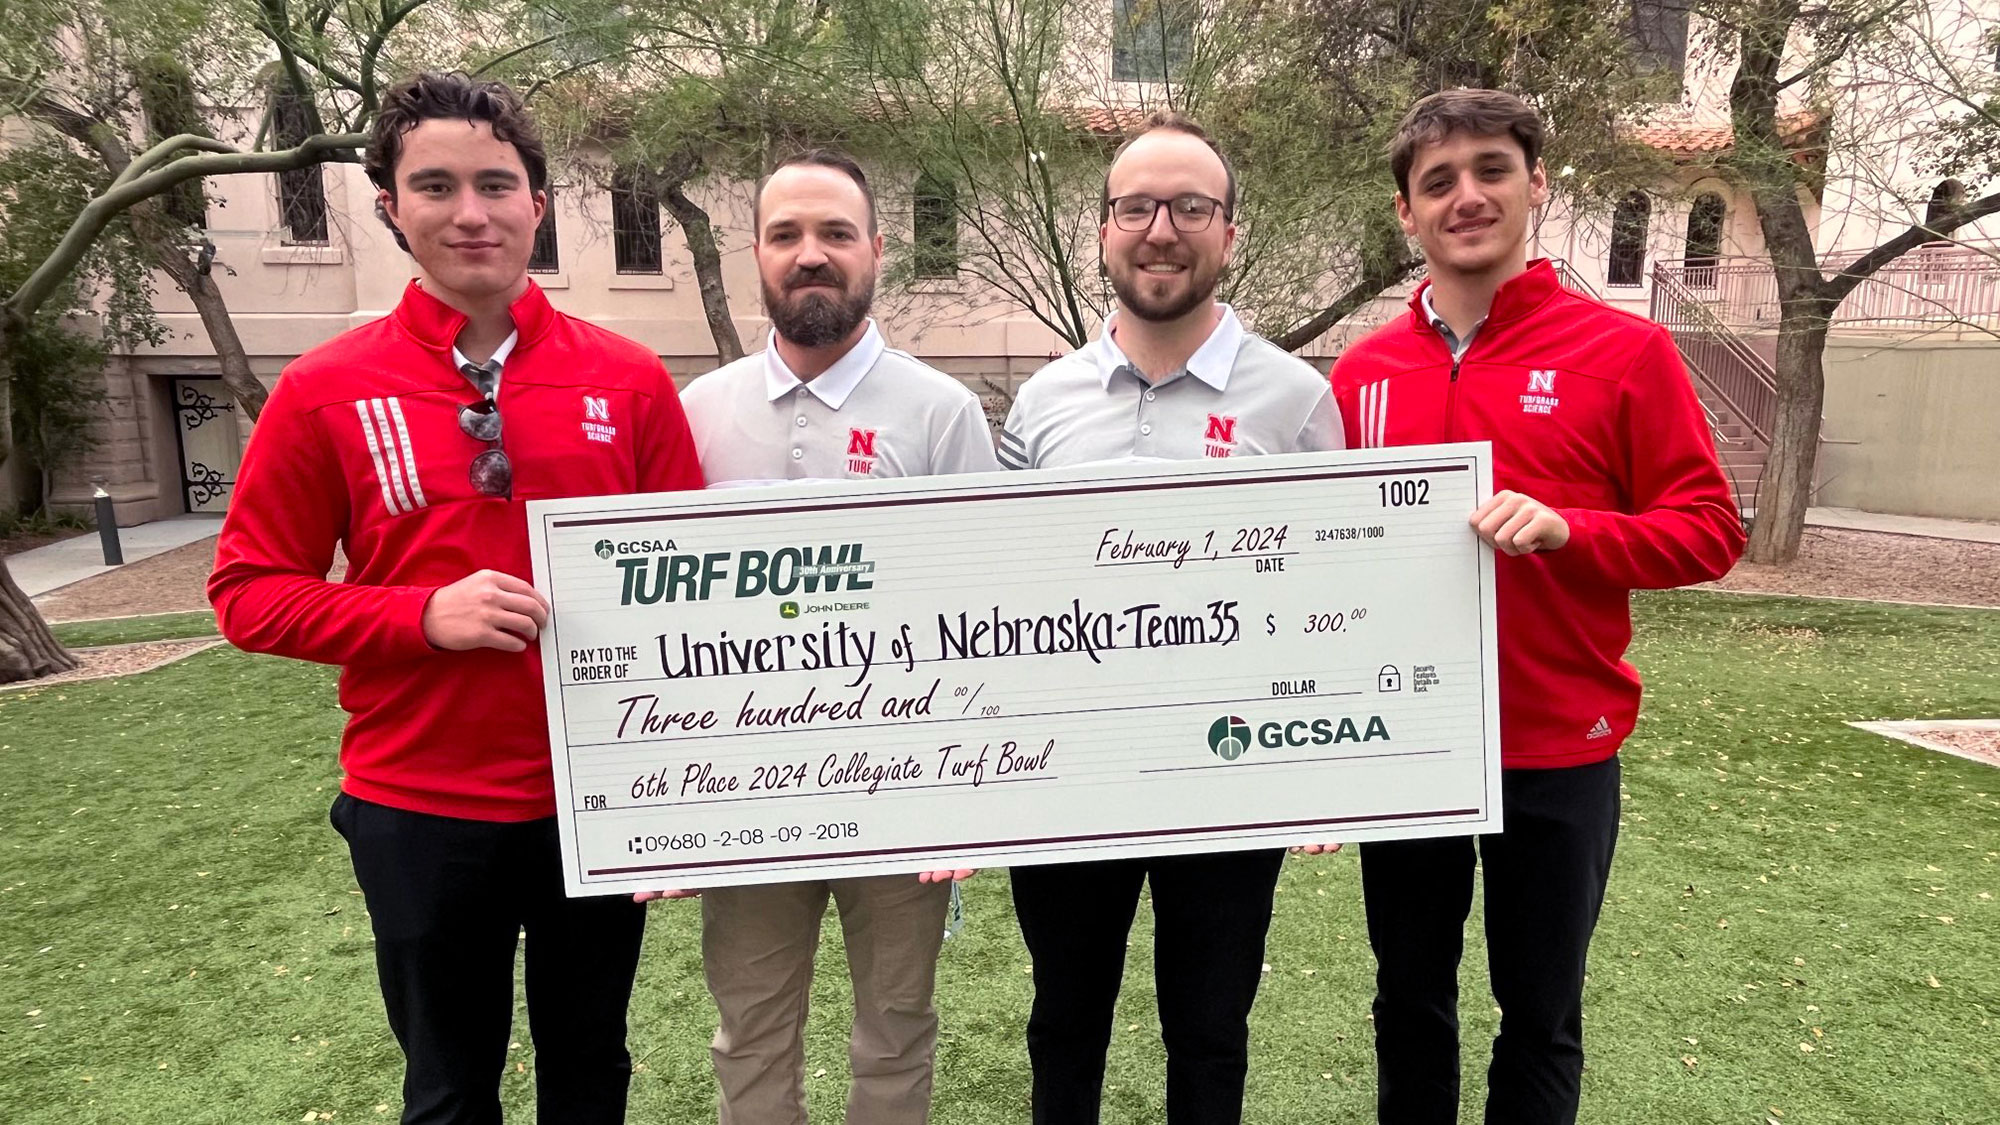 Scout Allen (from left), Alex Uram, John Tines and Matt Boyd hold the winnings from the their 6th place win at the 2024 GCSAA Annual Collegiate Turf Bowl Jan. 31 in Phoenix. 